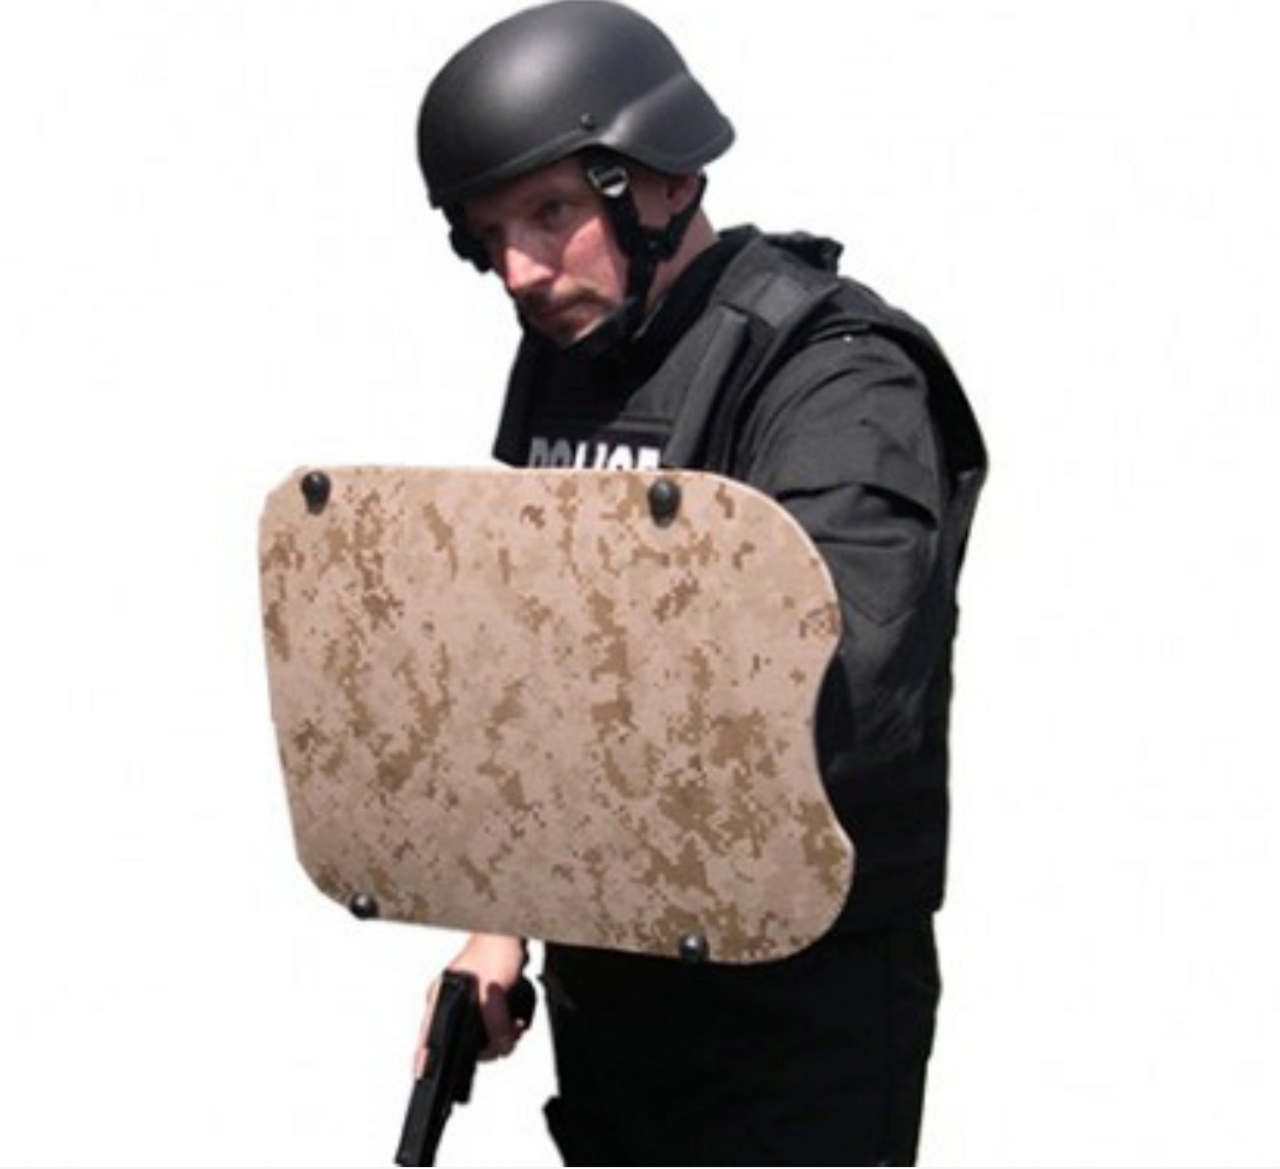 United Shield Mobile Protection Ballistic Shield, NIJ Level IV Protection, Multi-Strike Protection from Armor Piercing Rounds, Multiple Sizes